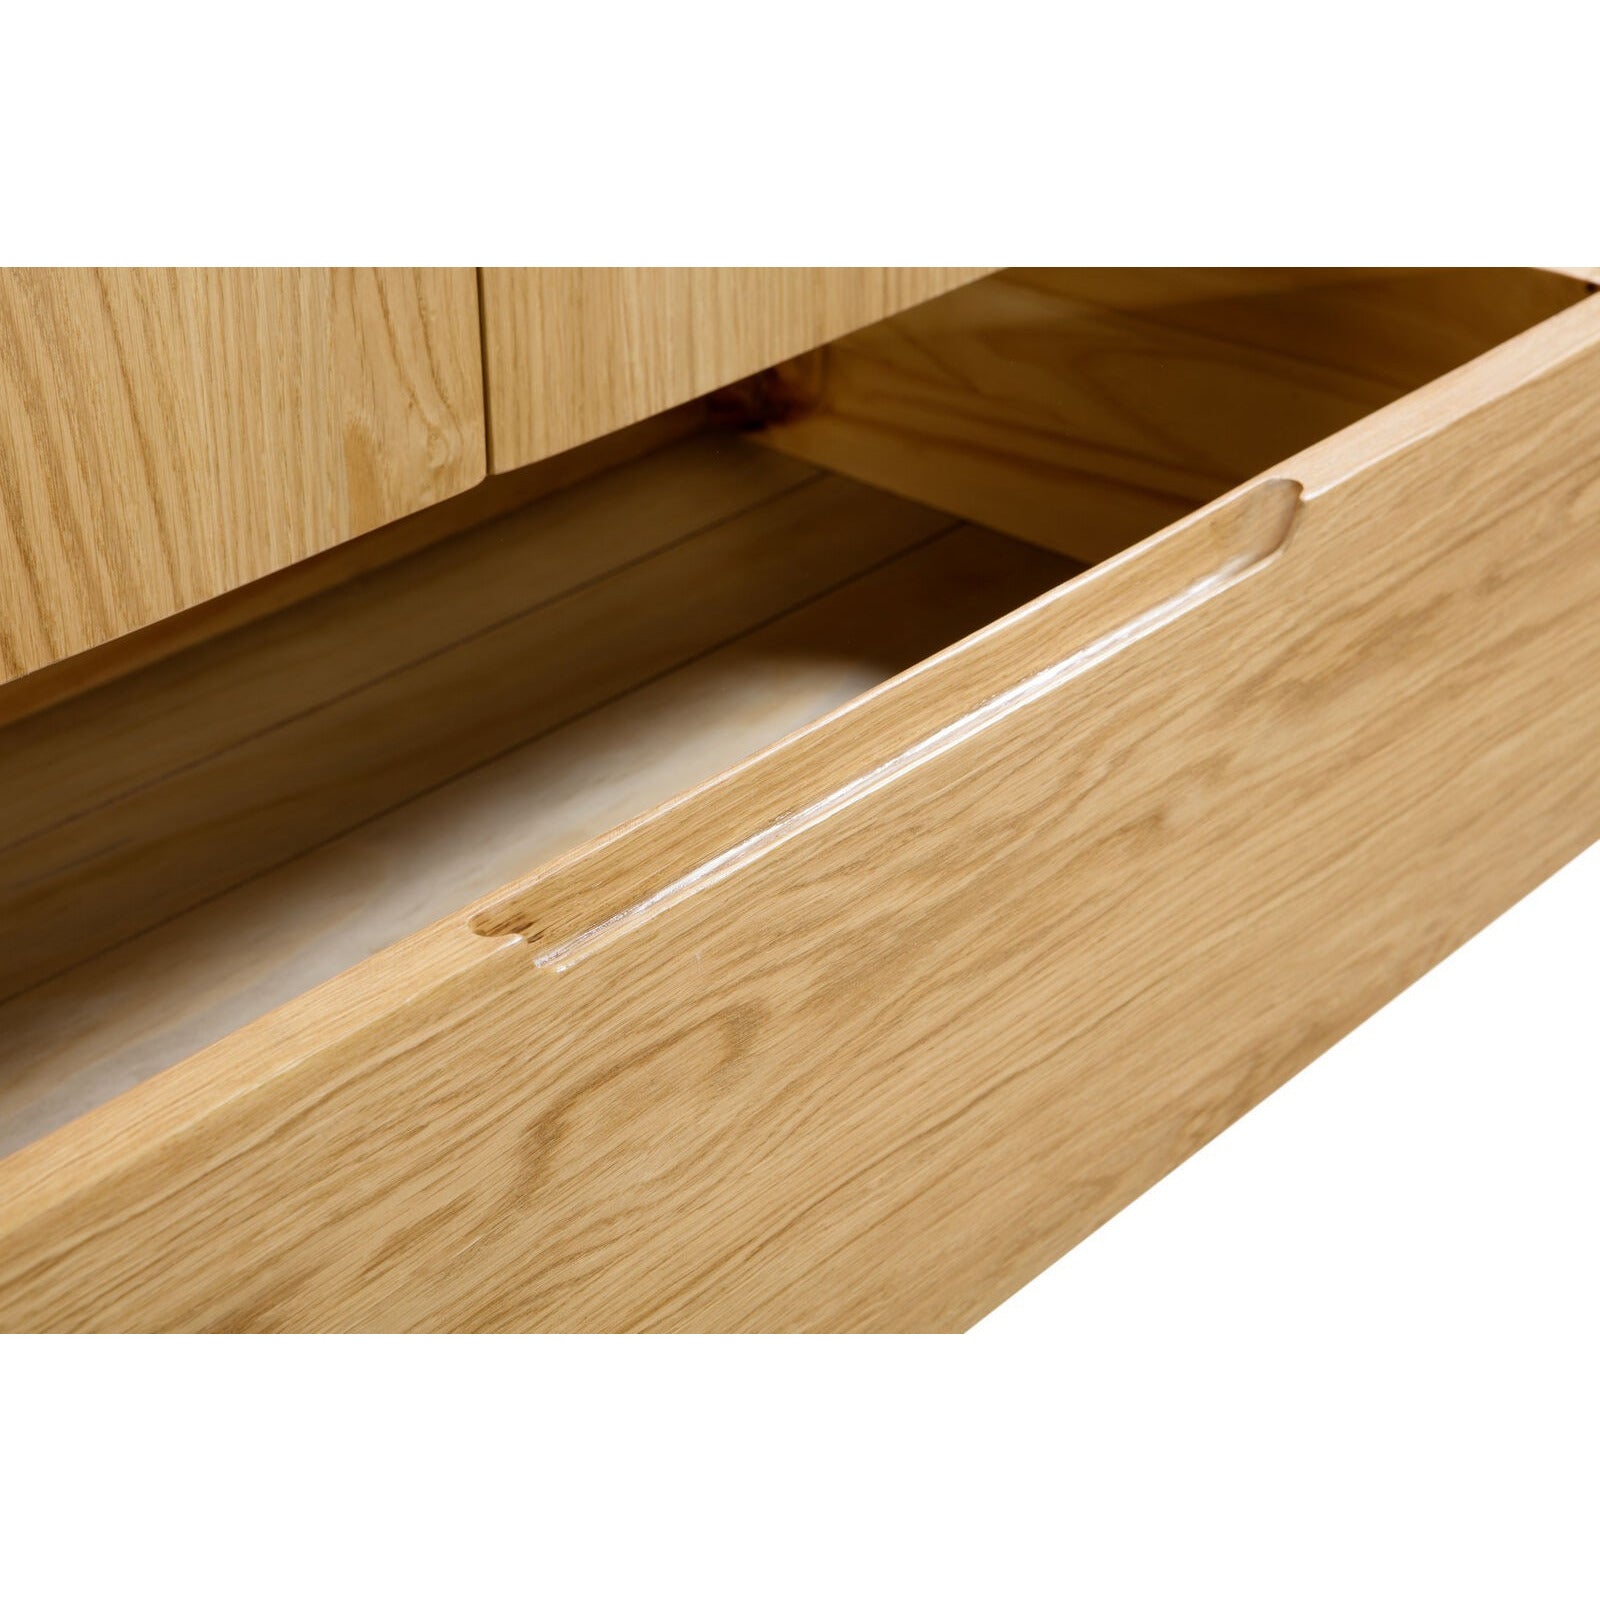 CURVE 3 DRAWER CHEST